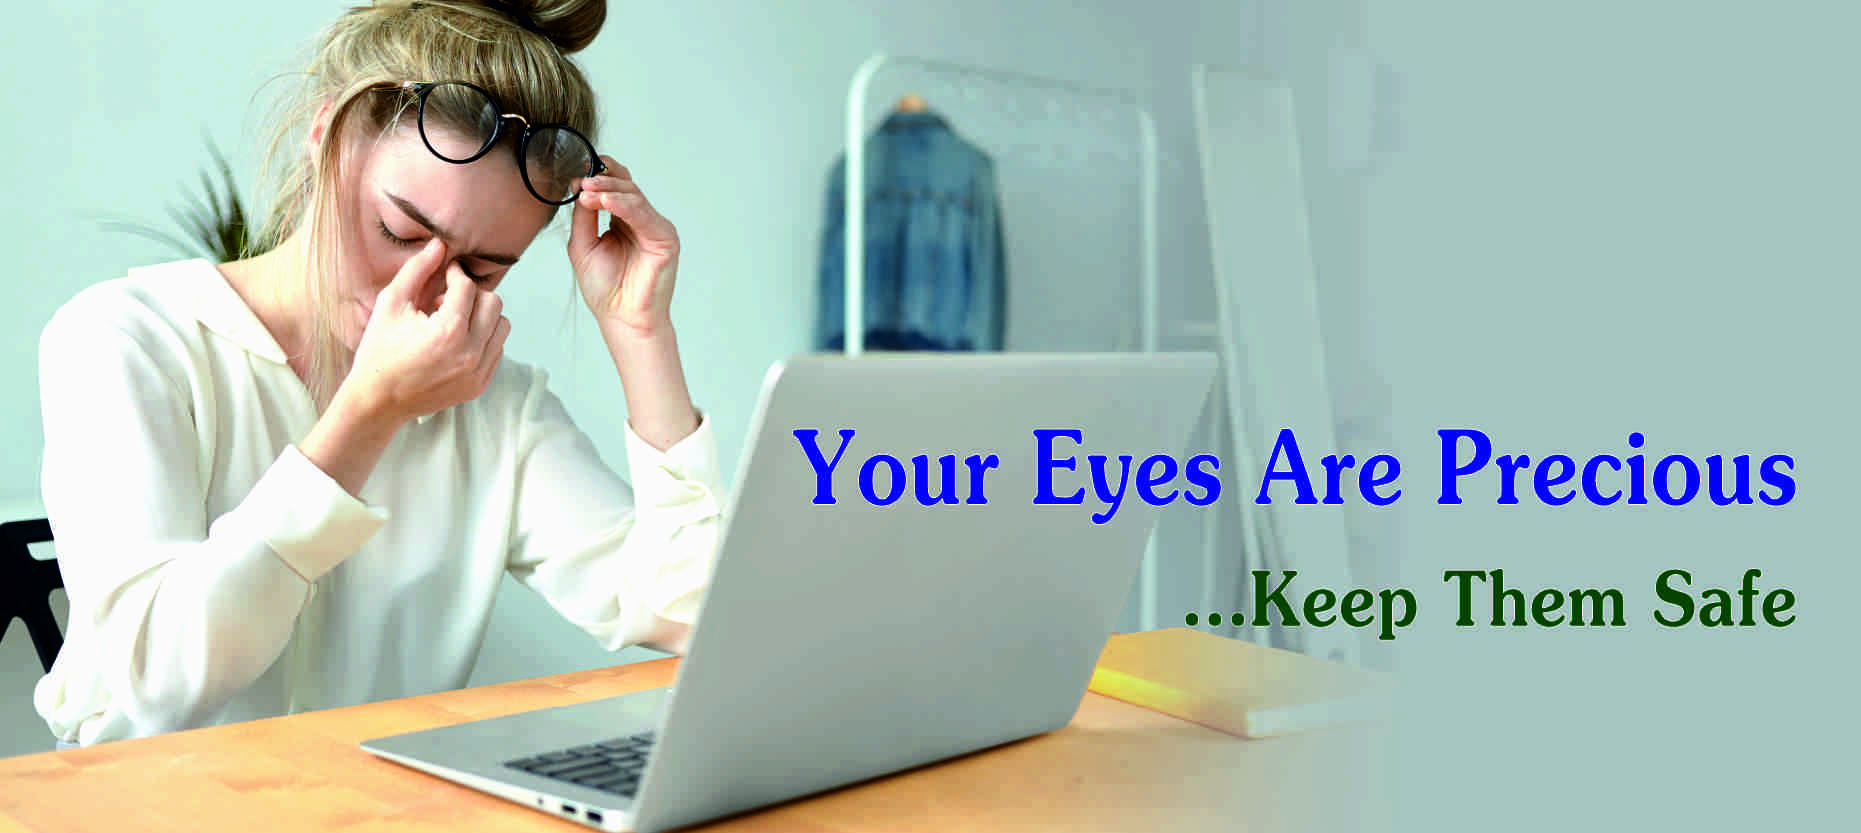 Protect Eyes from Computer Screen